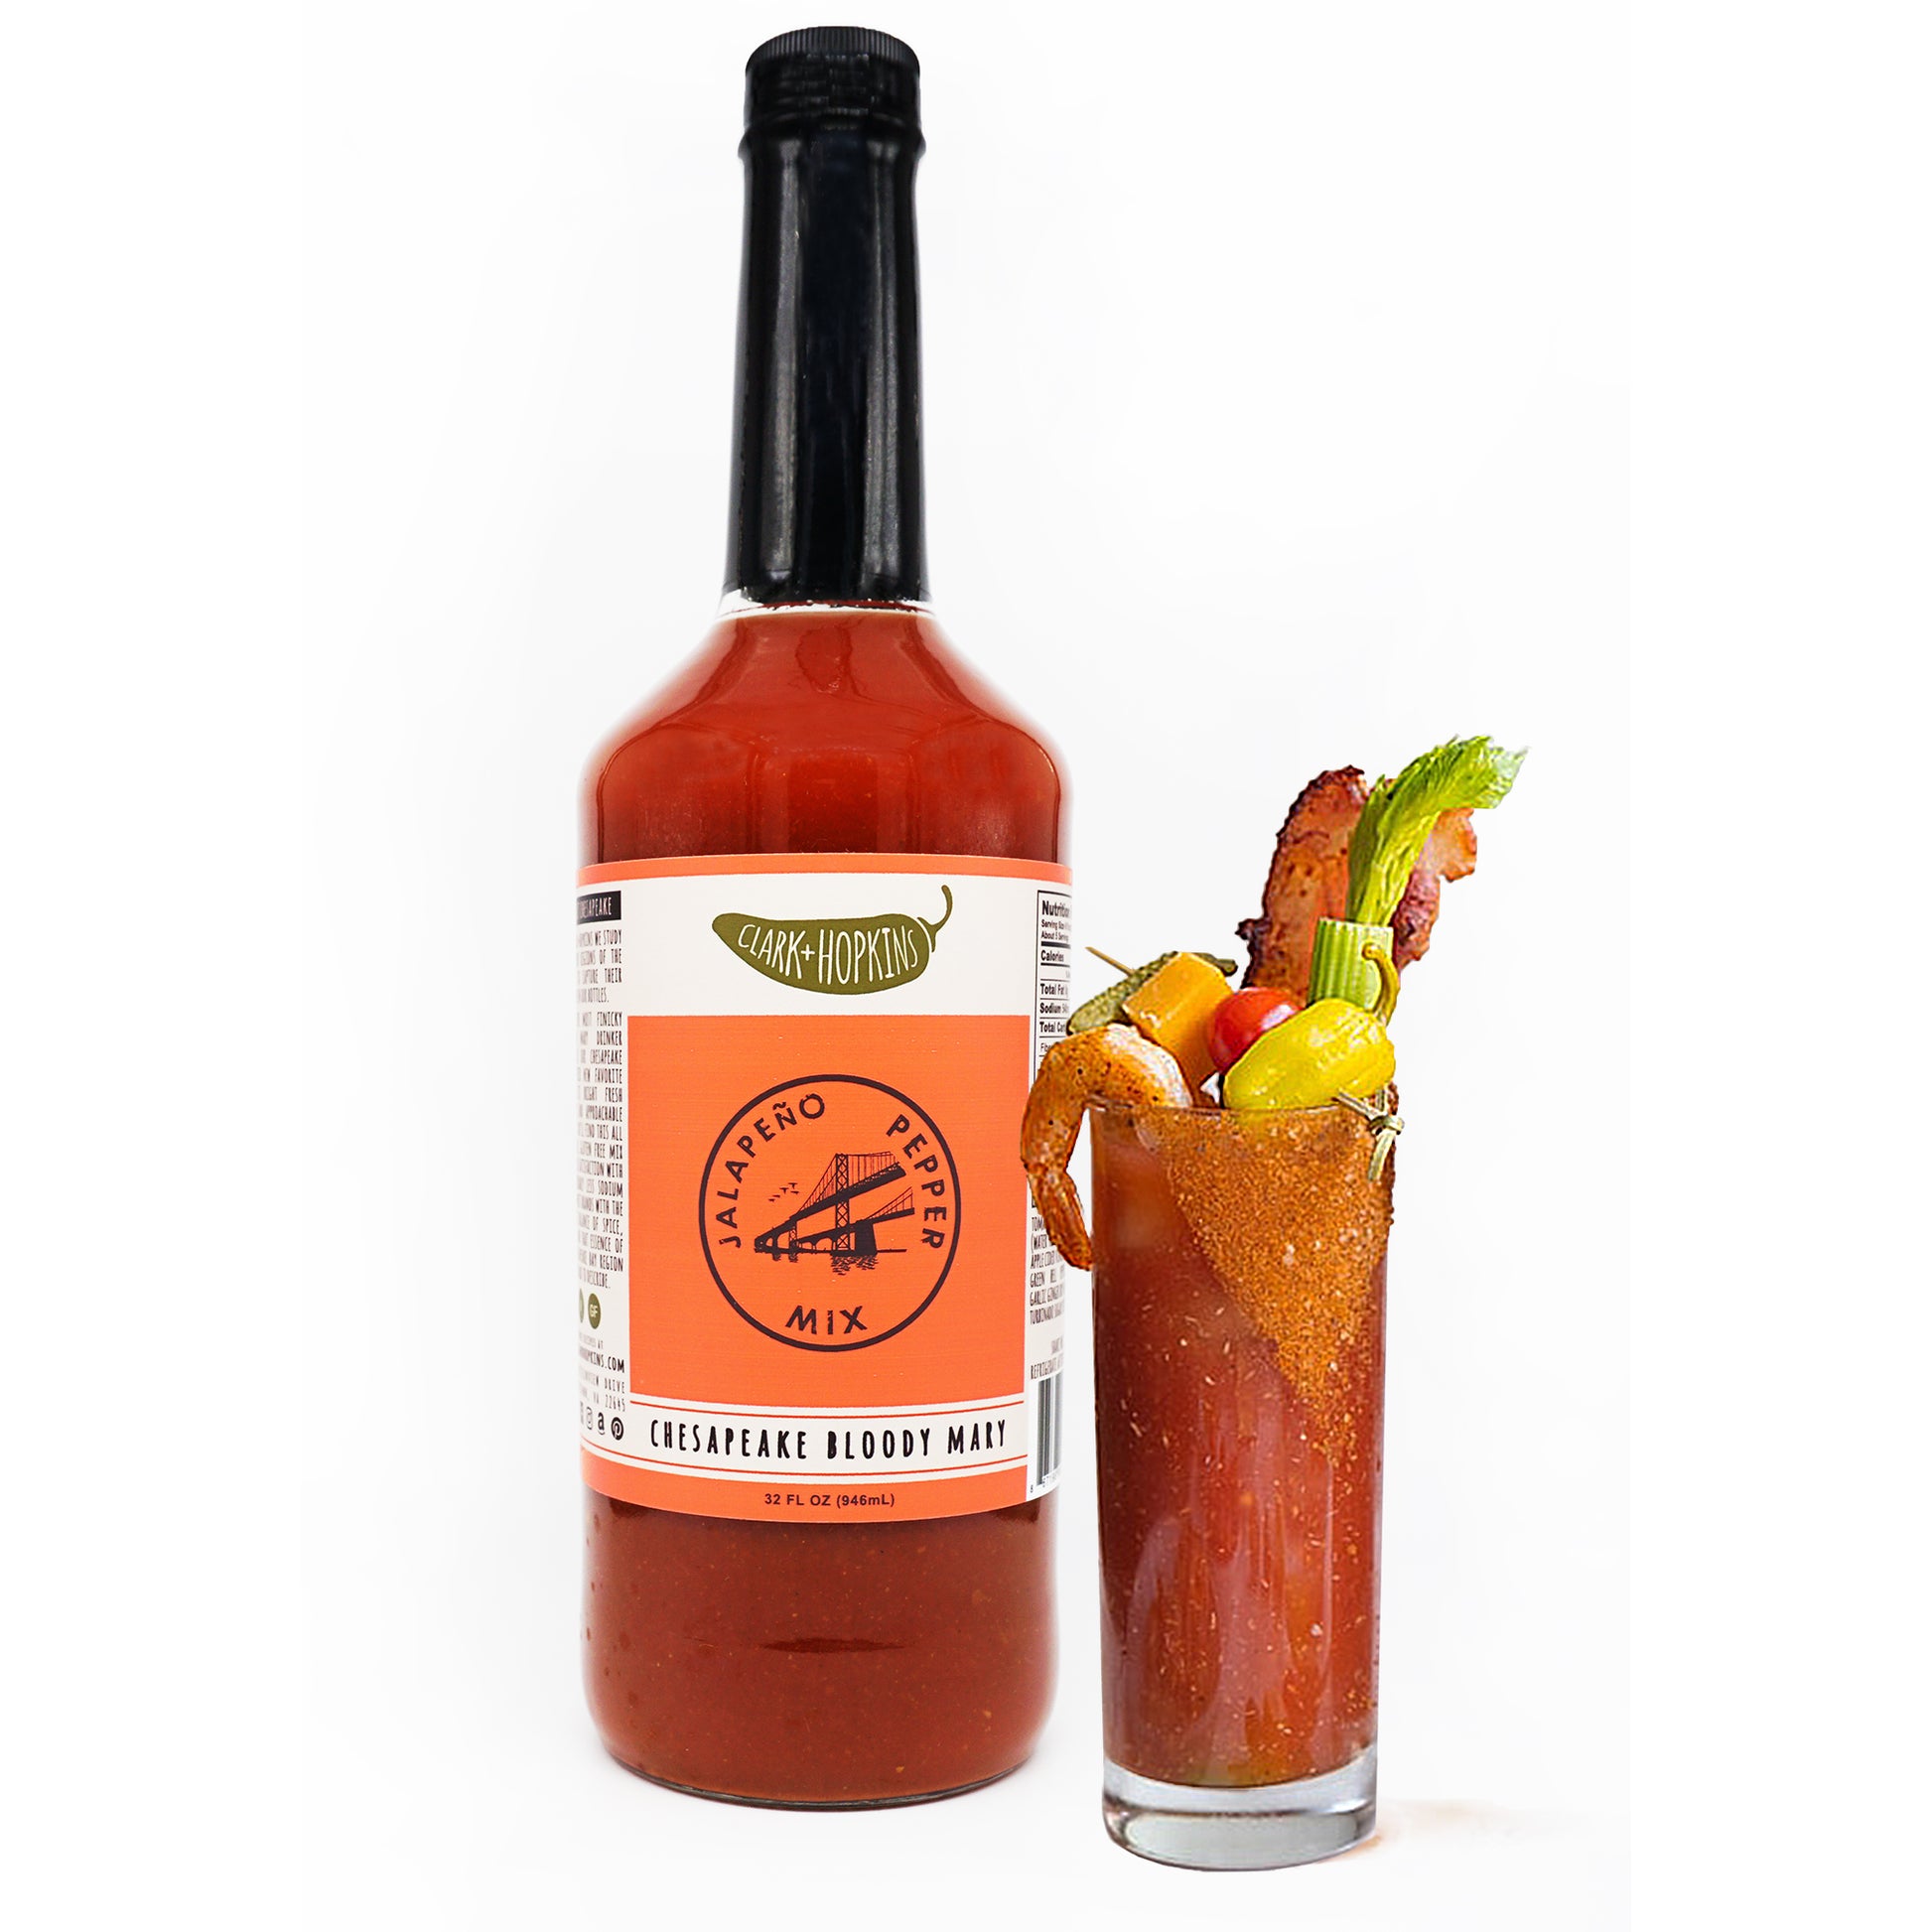 CHESAPEAKE BLOODY MARY front bottle prepared bloody mary cocktail